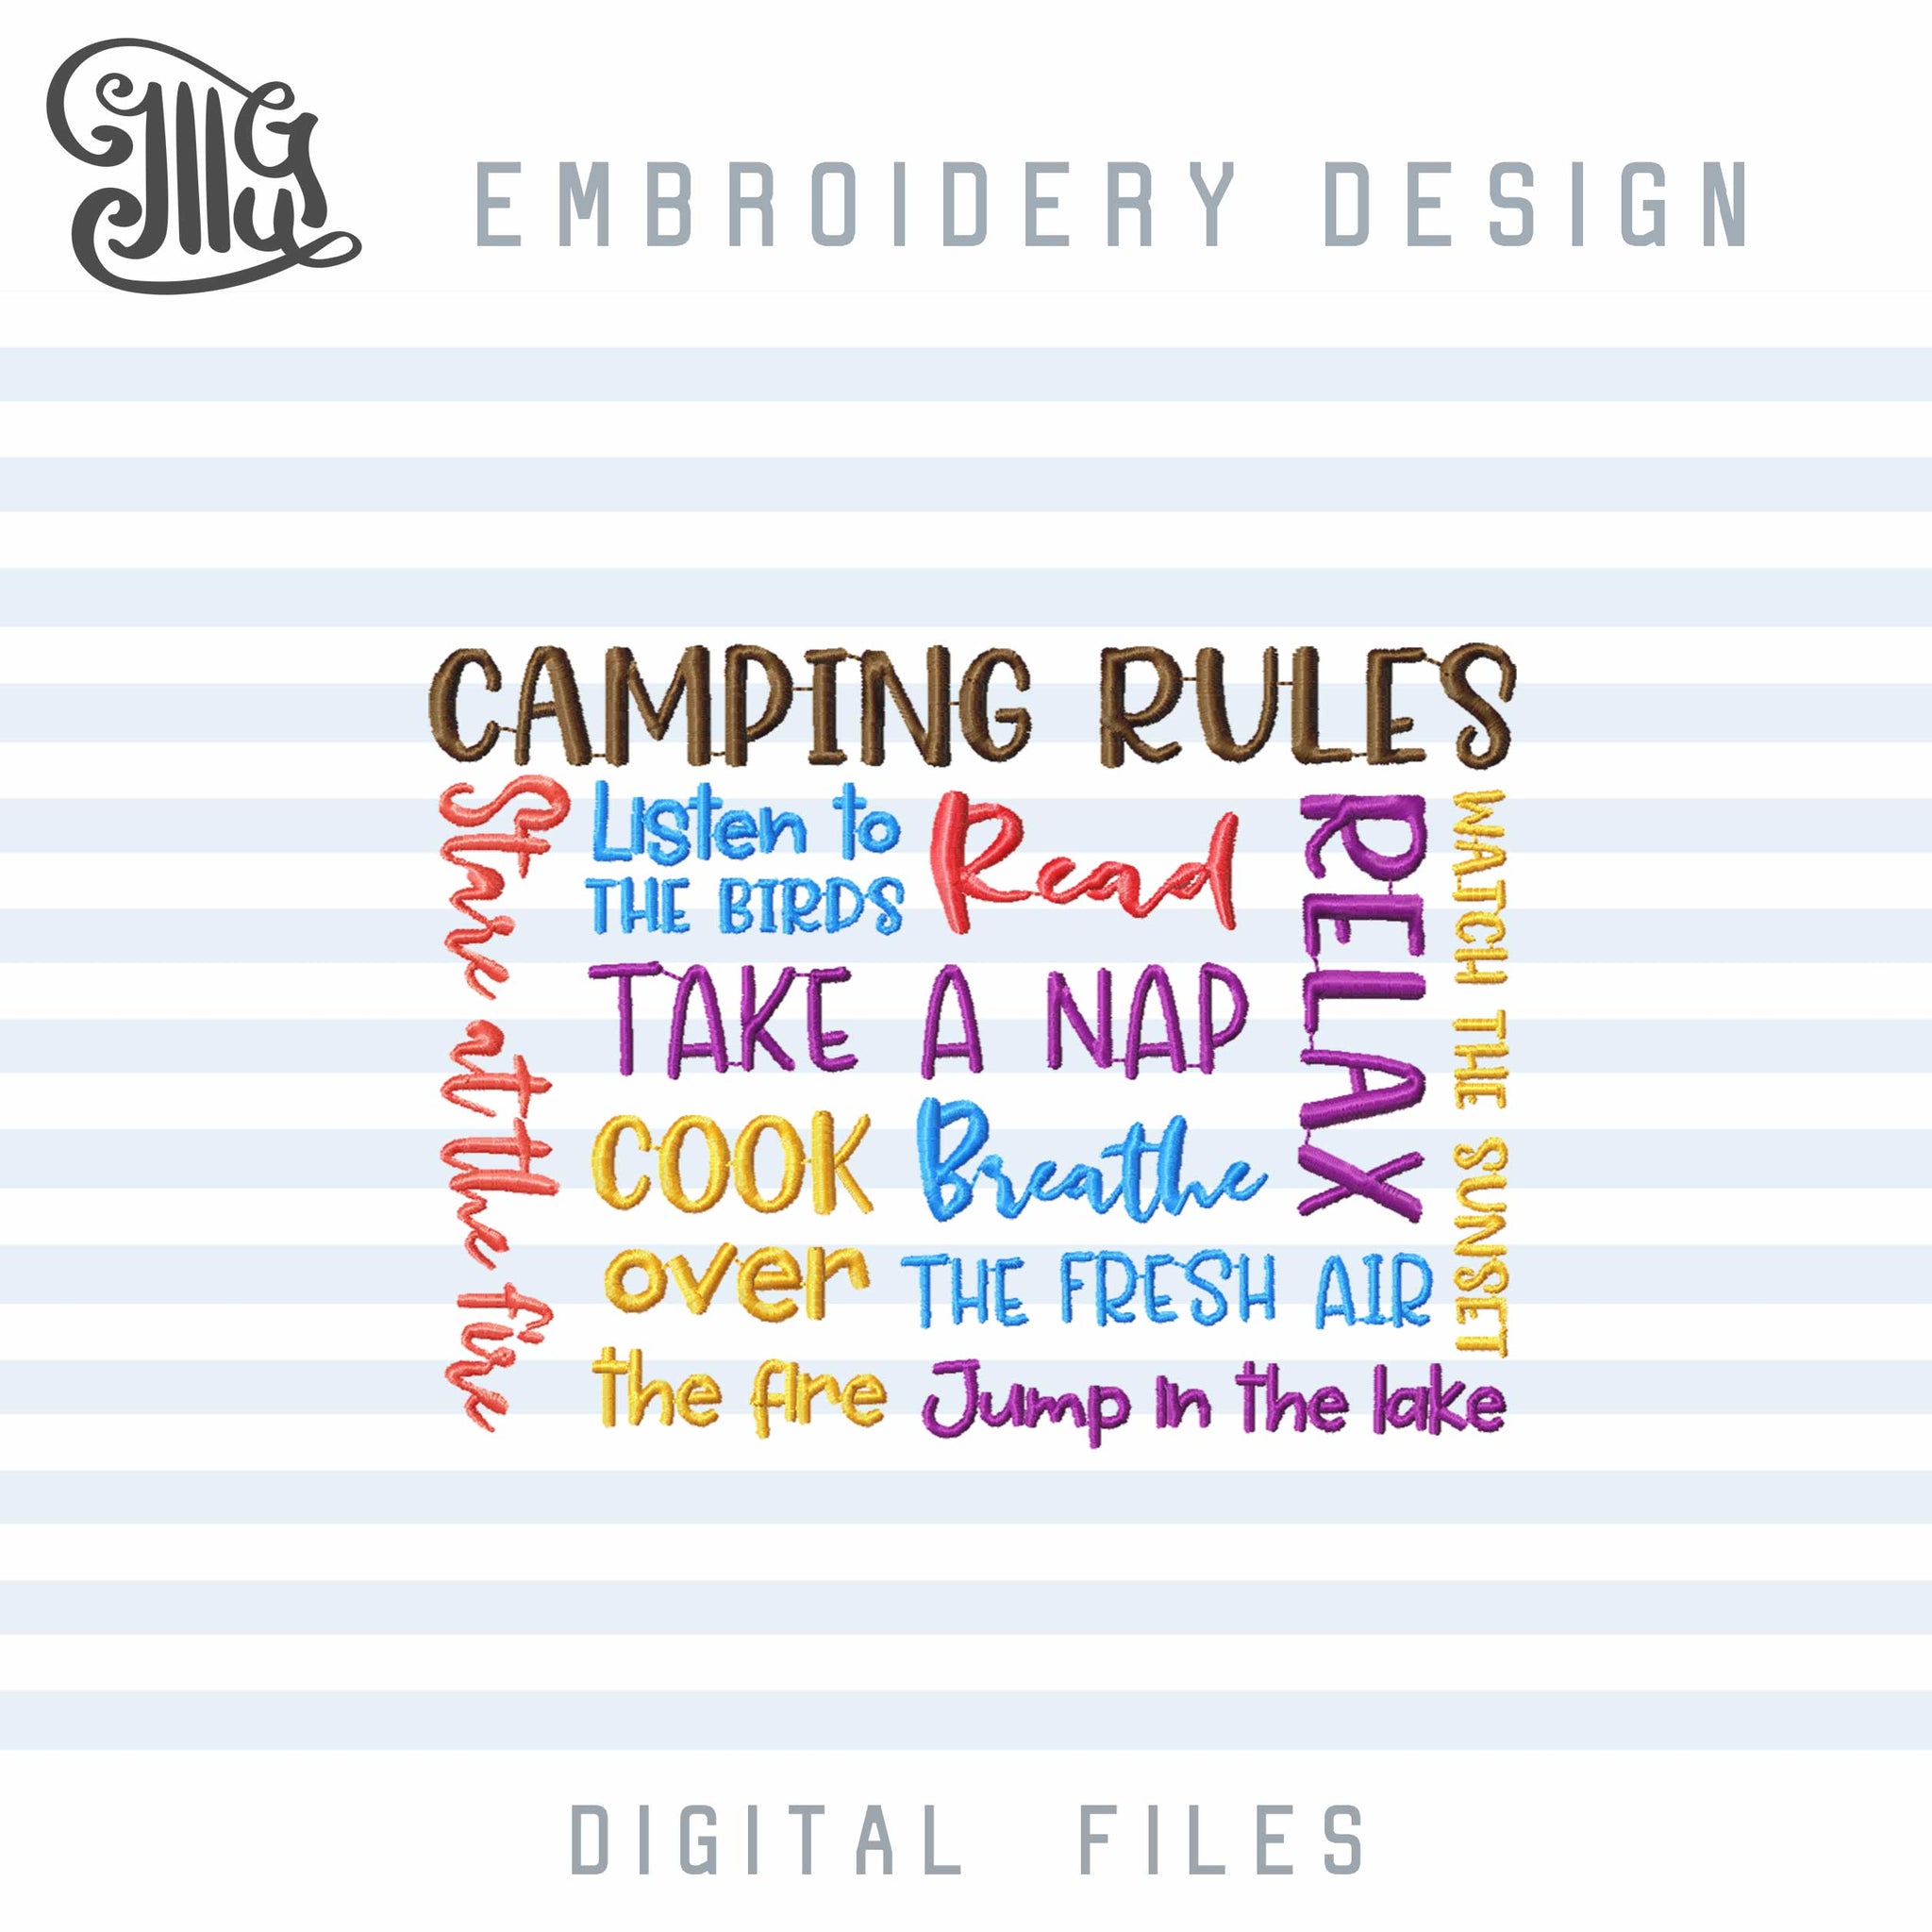 Camping Rules Embroidery Designs, Camping Flag Embroidery ...